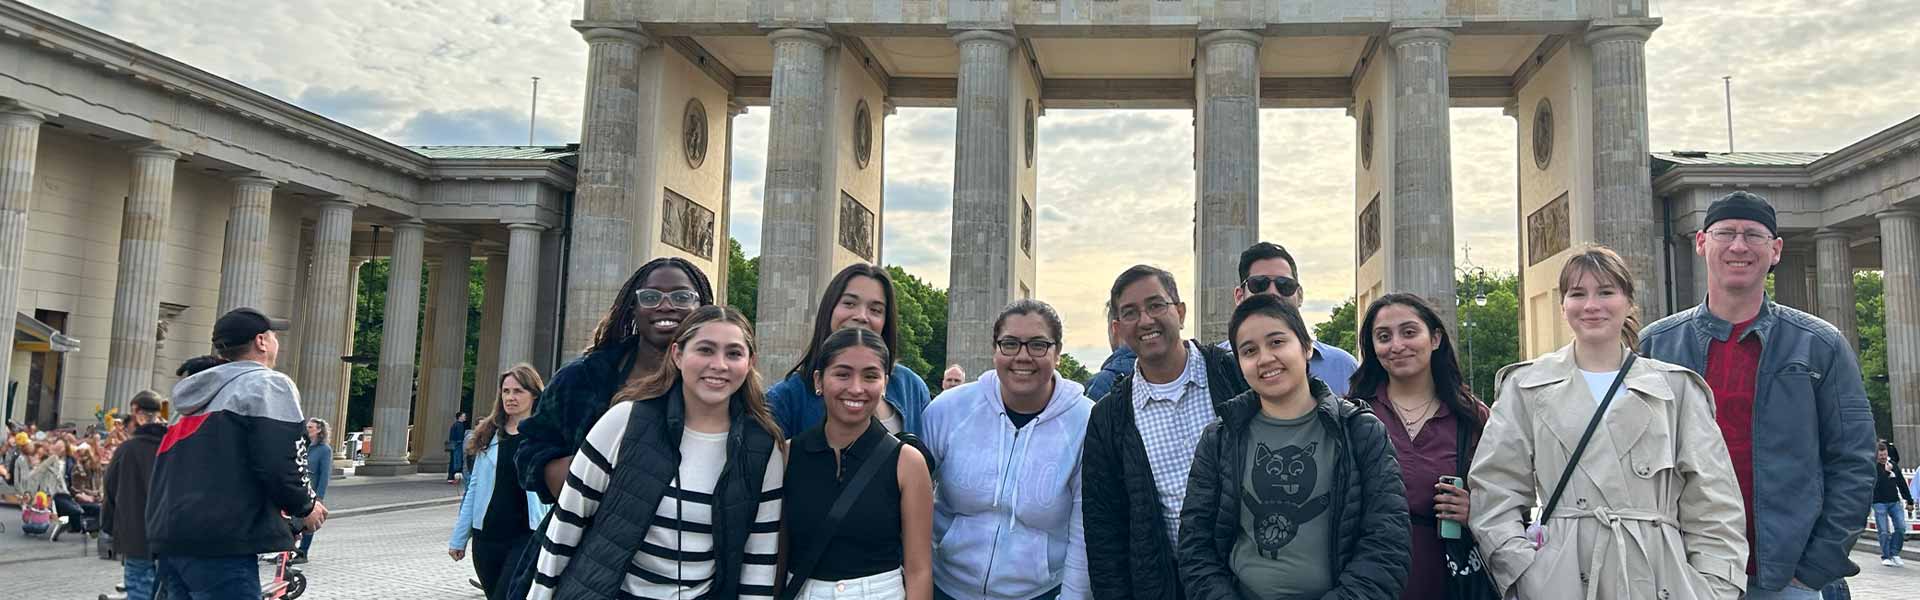 A group of study abroad students in front of the Brandenburg Gate